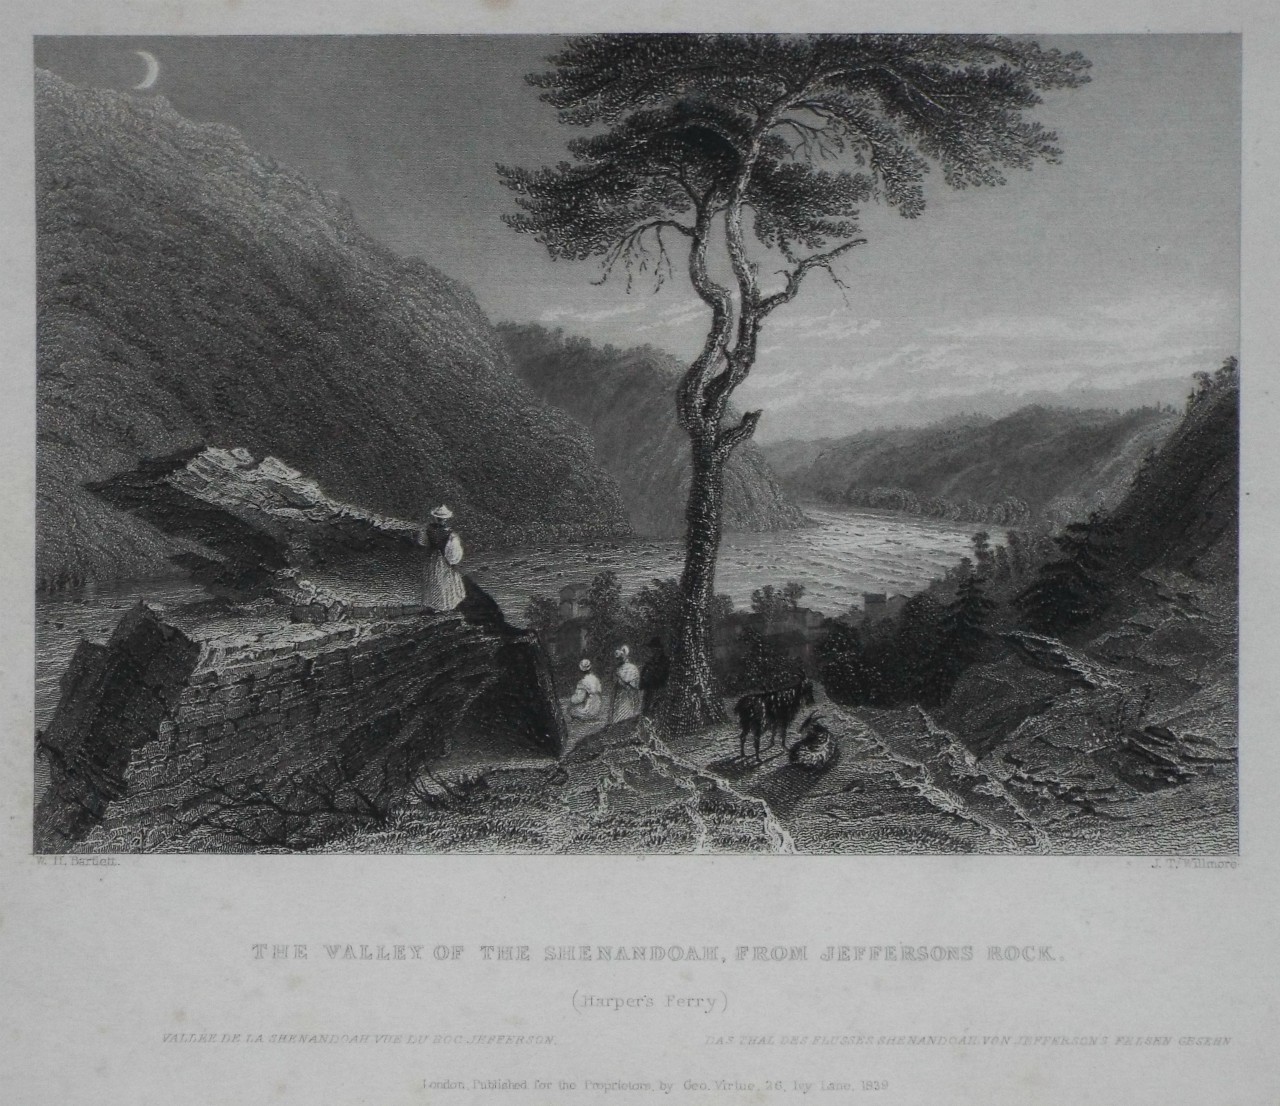 Print - The Valley of the Shenandoah, from Jeffersons Rock. (Harper's Ferry) - Willmore